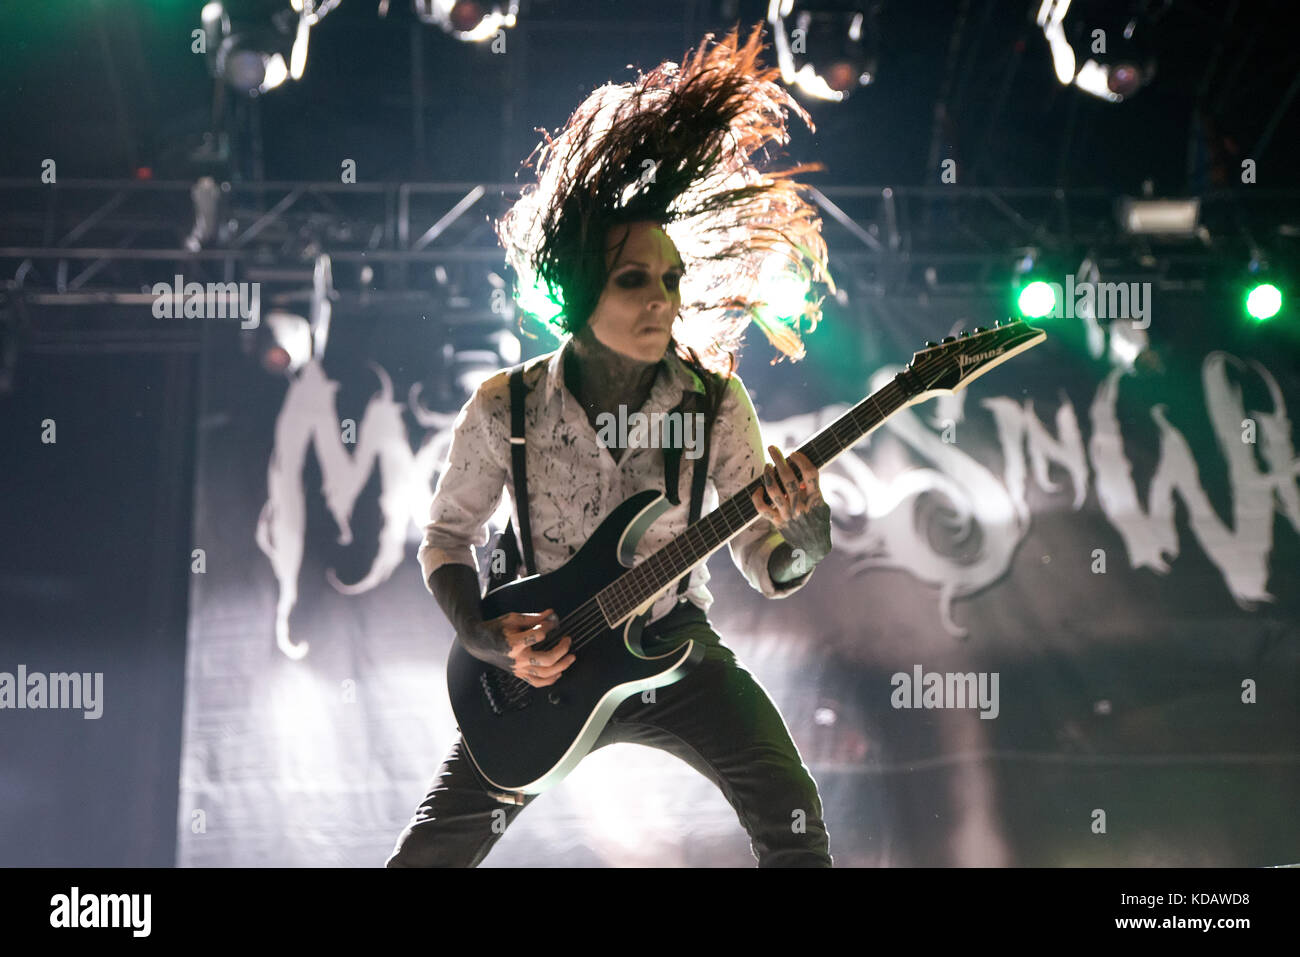 MADRID - JUN 22: Motionless in White (metalcore music band) perform in concert at Download (heavy metal music festival) on June 22, 2017 in Madrid, Sp Stock Photo